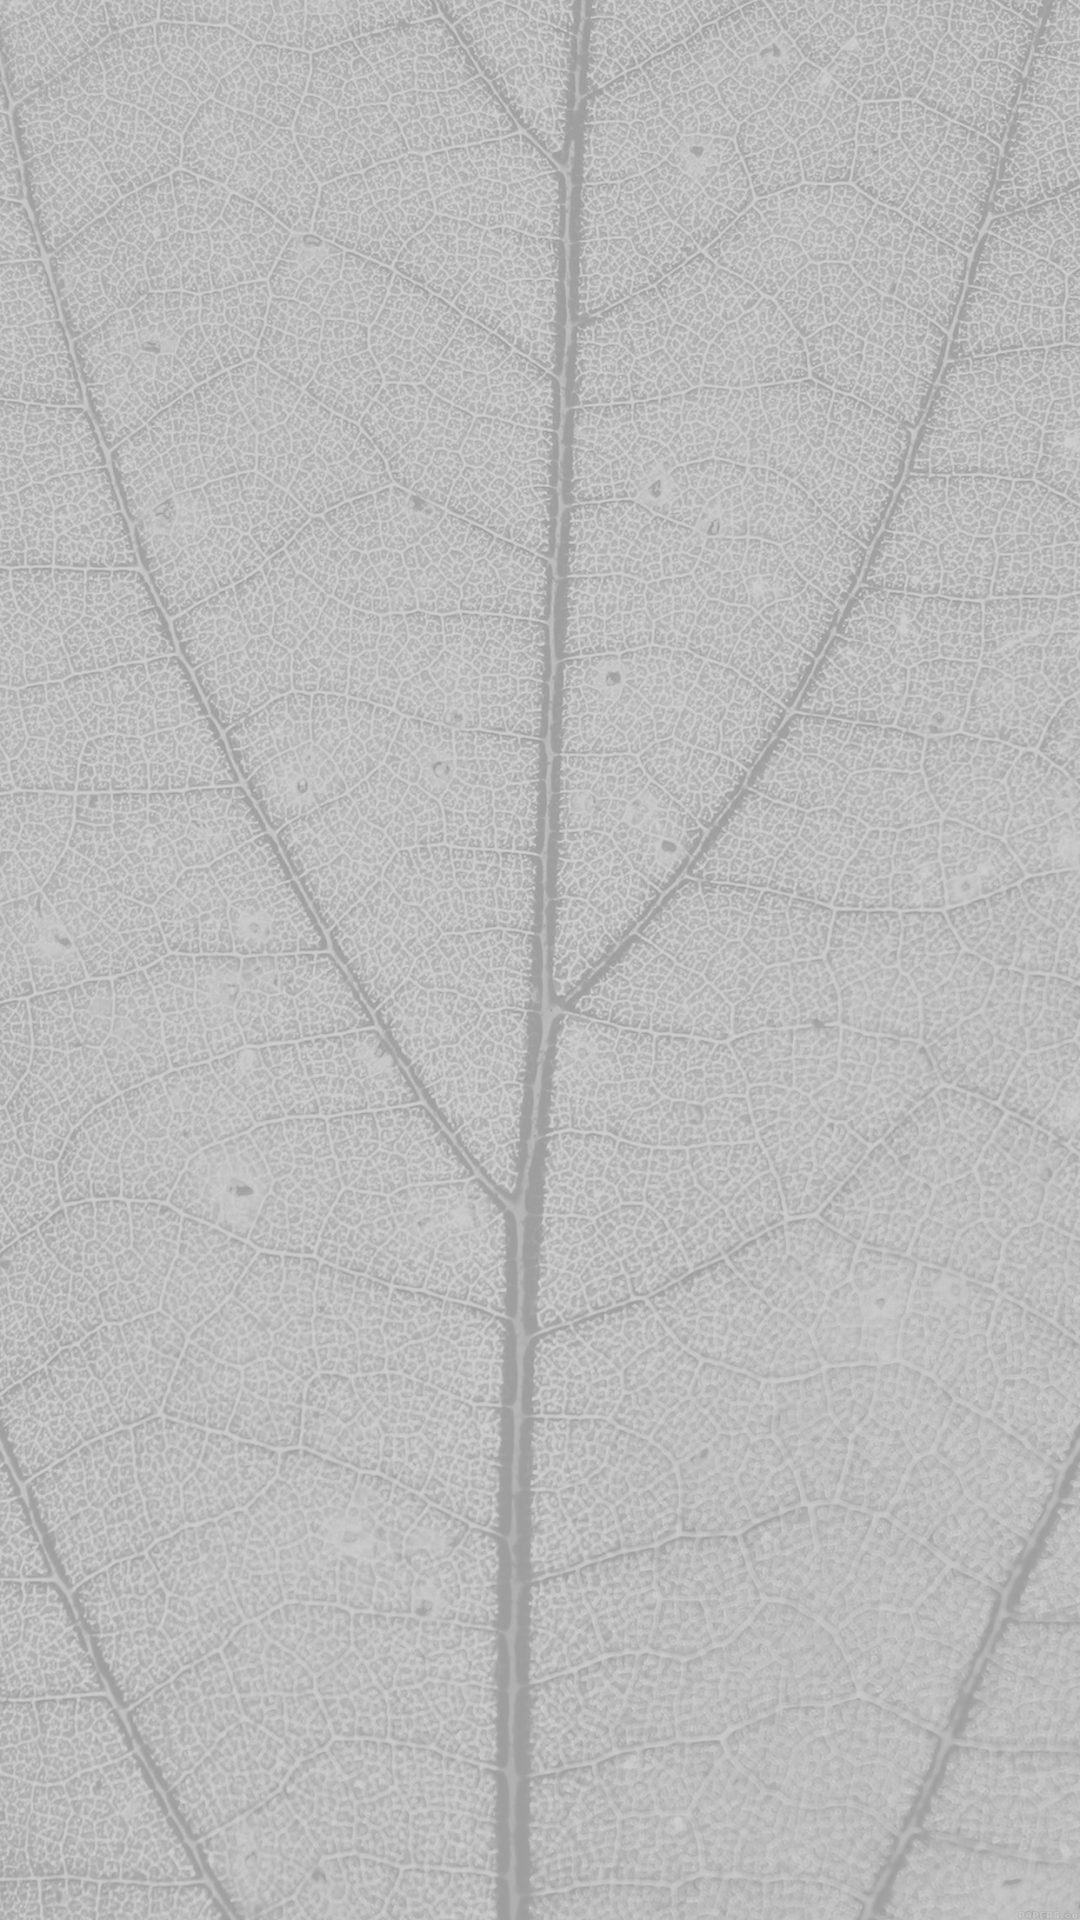 White Leaf Texture Nature Pattern